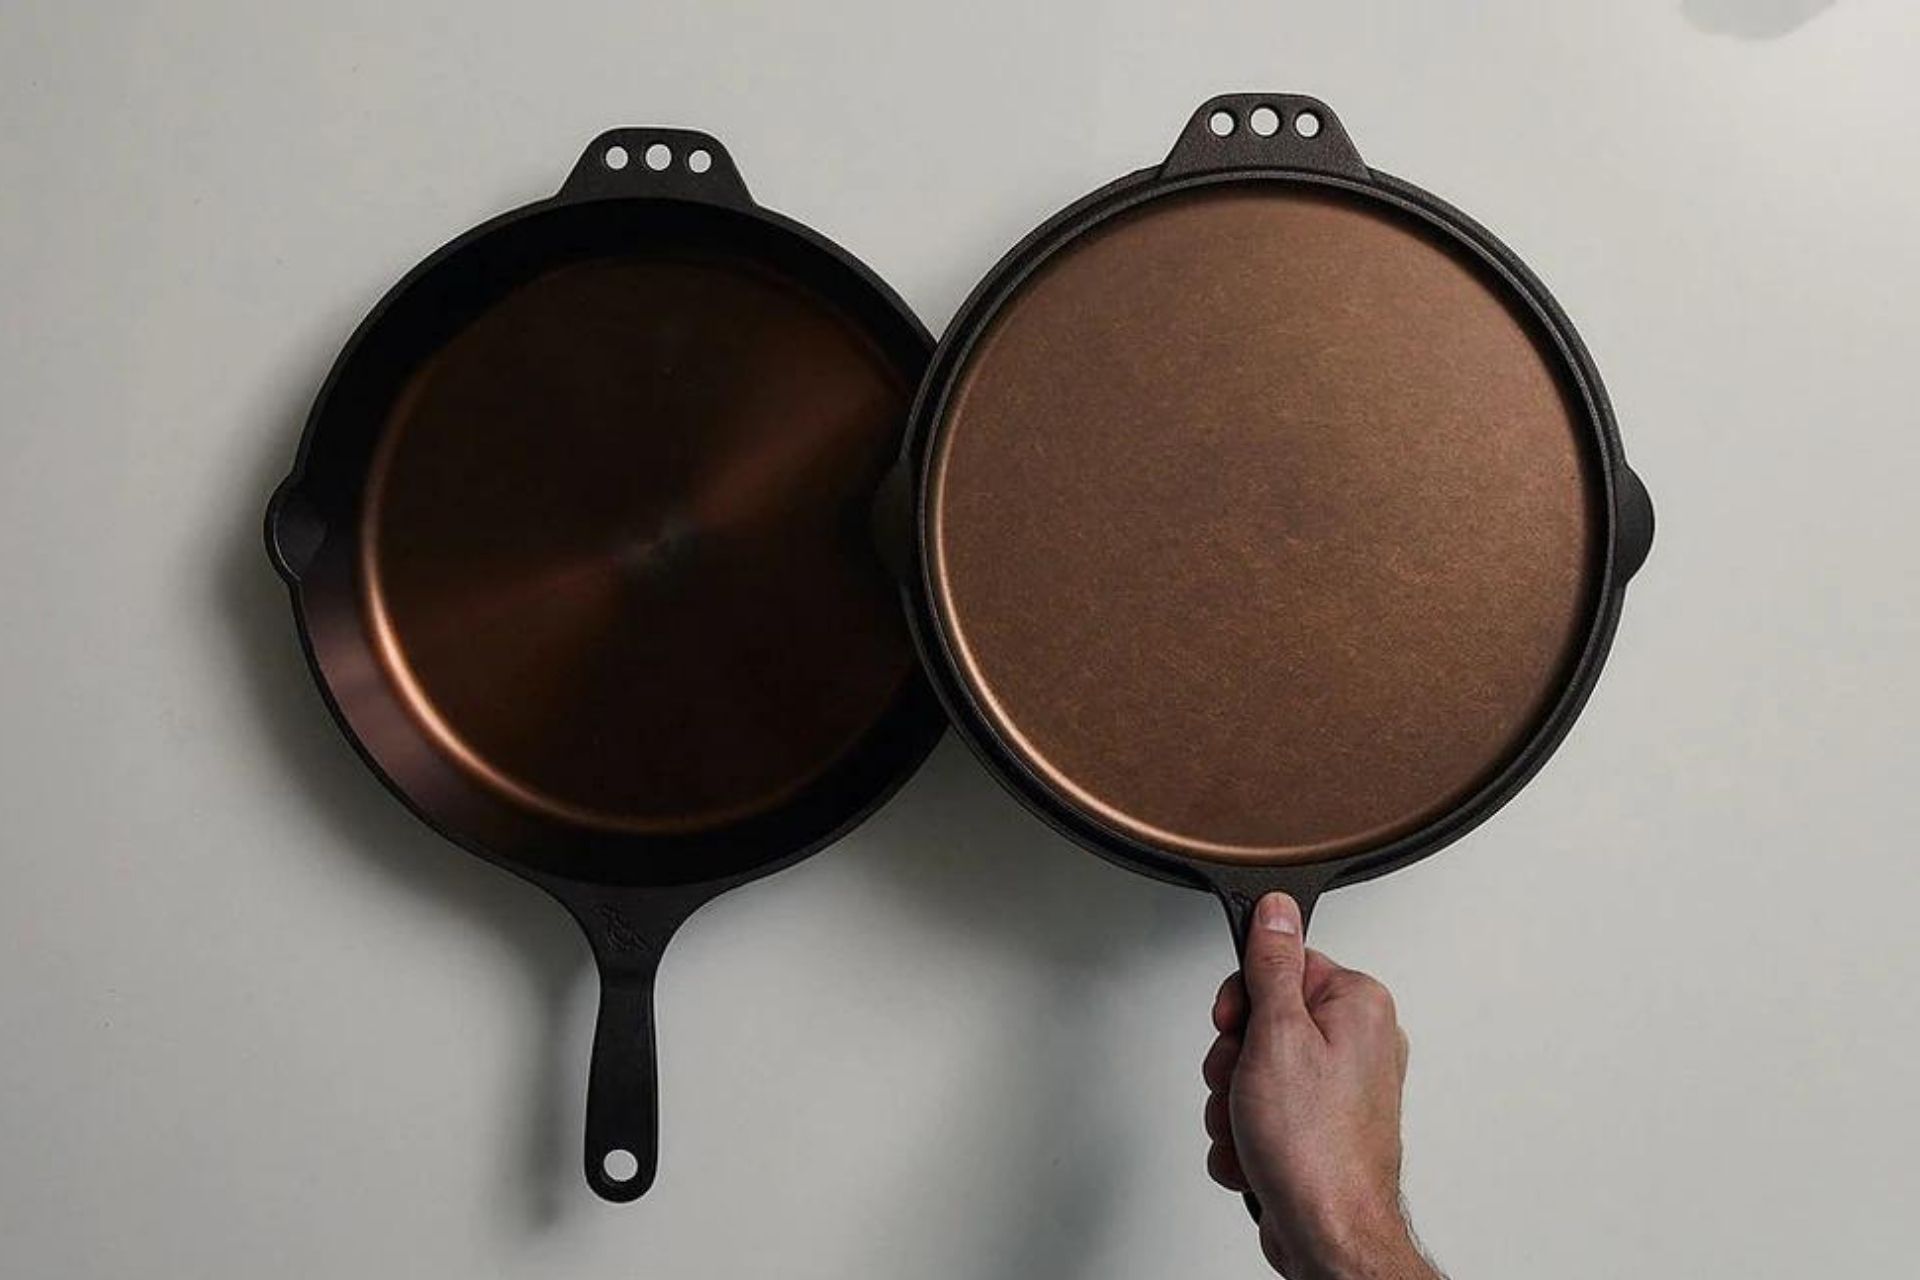 Charleston-Made Smithey Cast-Iron Skillets Are Special, Here's Why